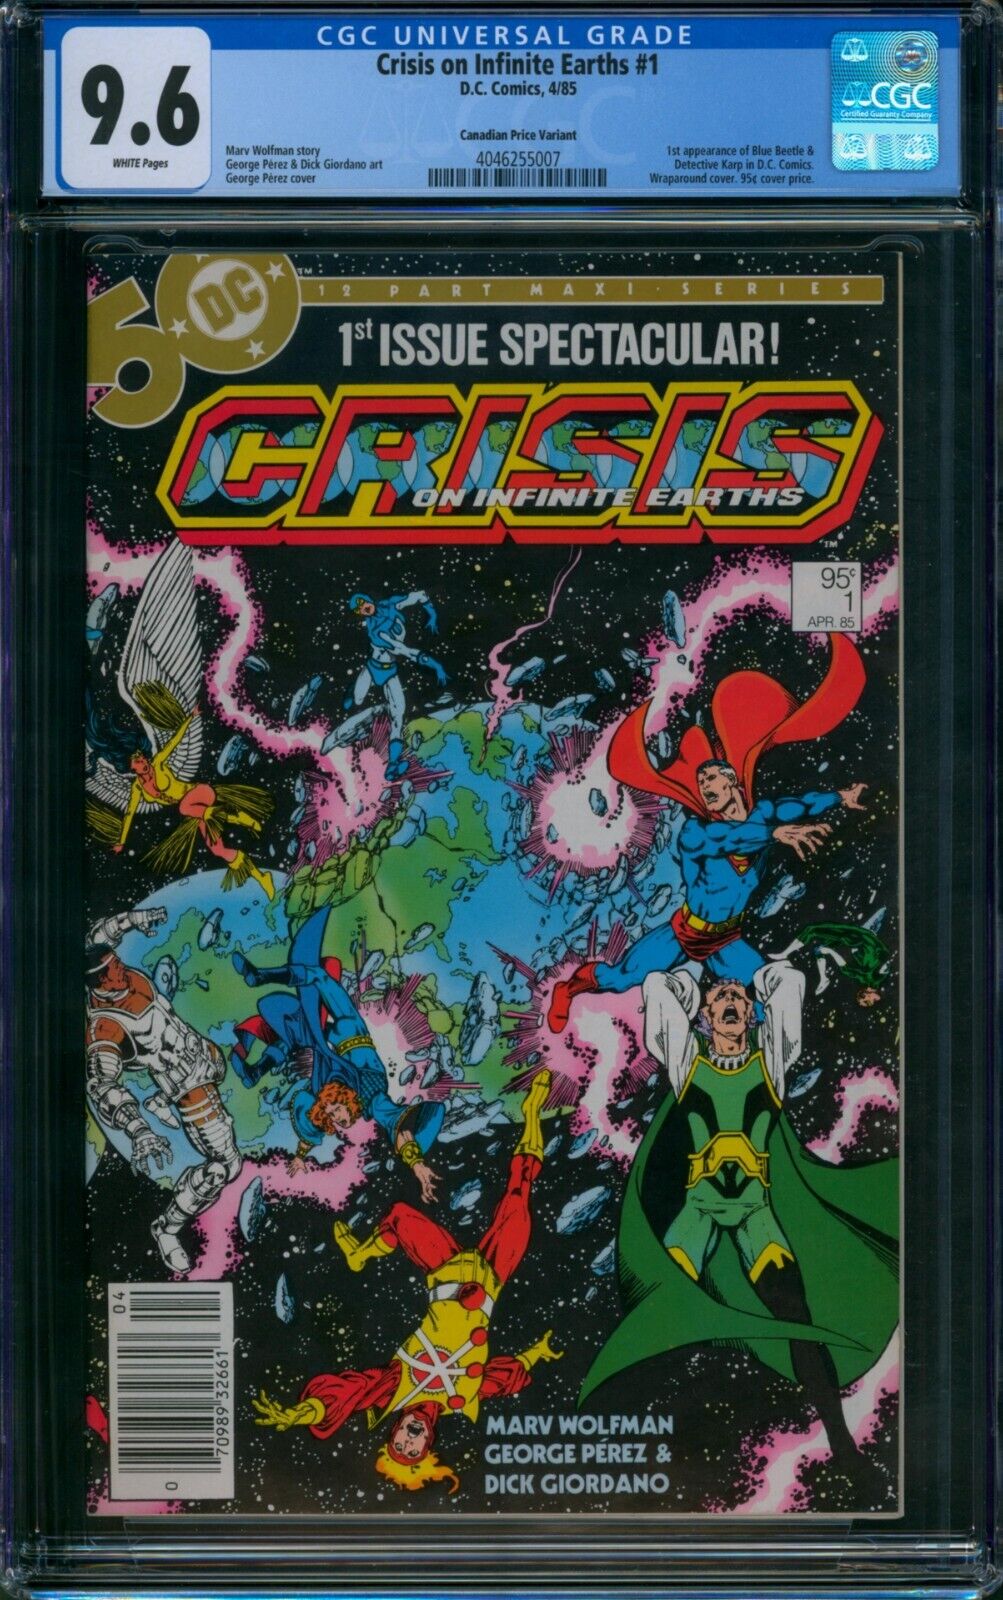 Crisis on Infinite Earths #1 CGC 9.6 ⭐ 95 CENT CANADIAN PRICE VARIANT ⭐ DC 1985